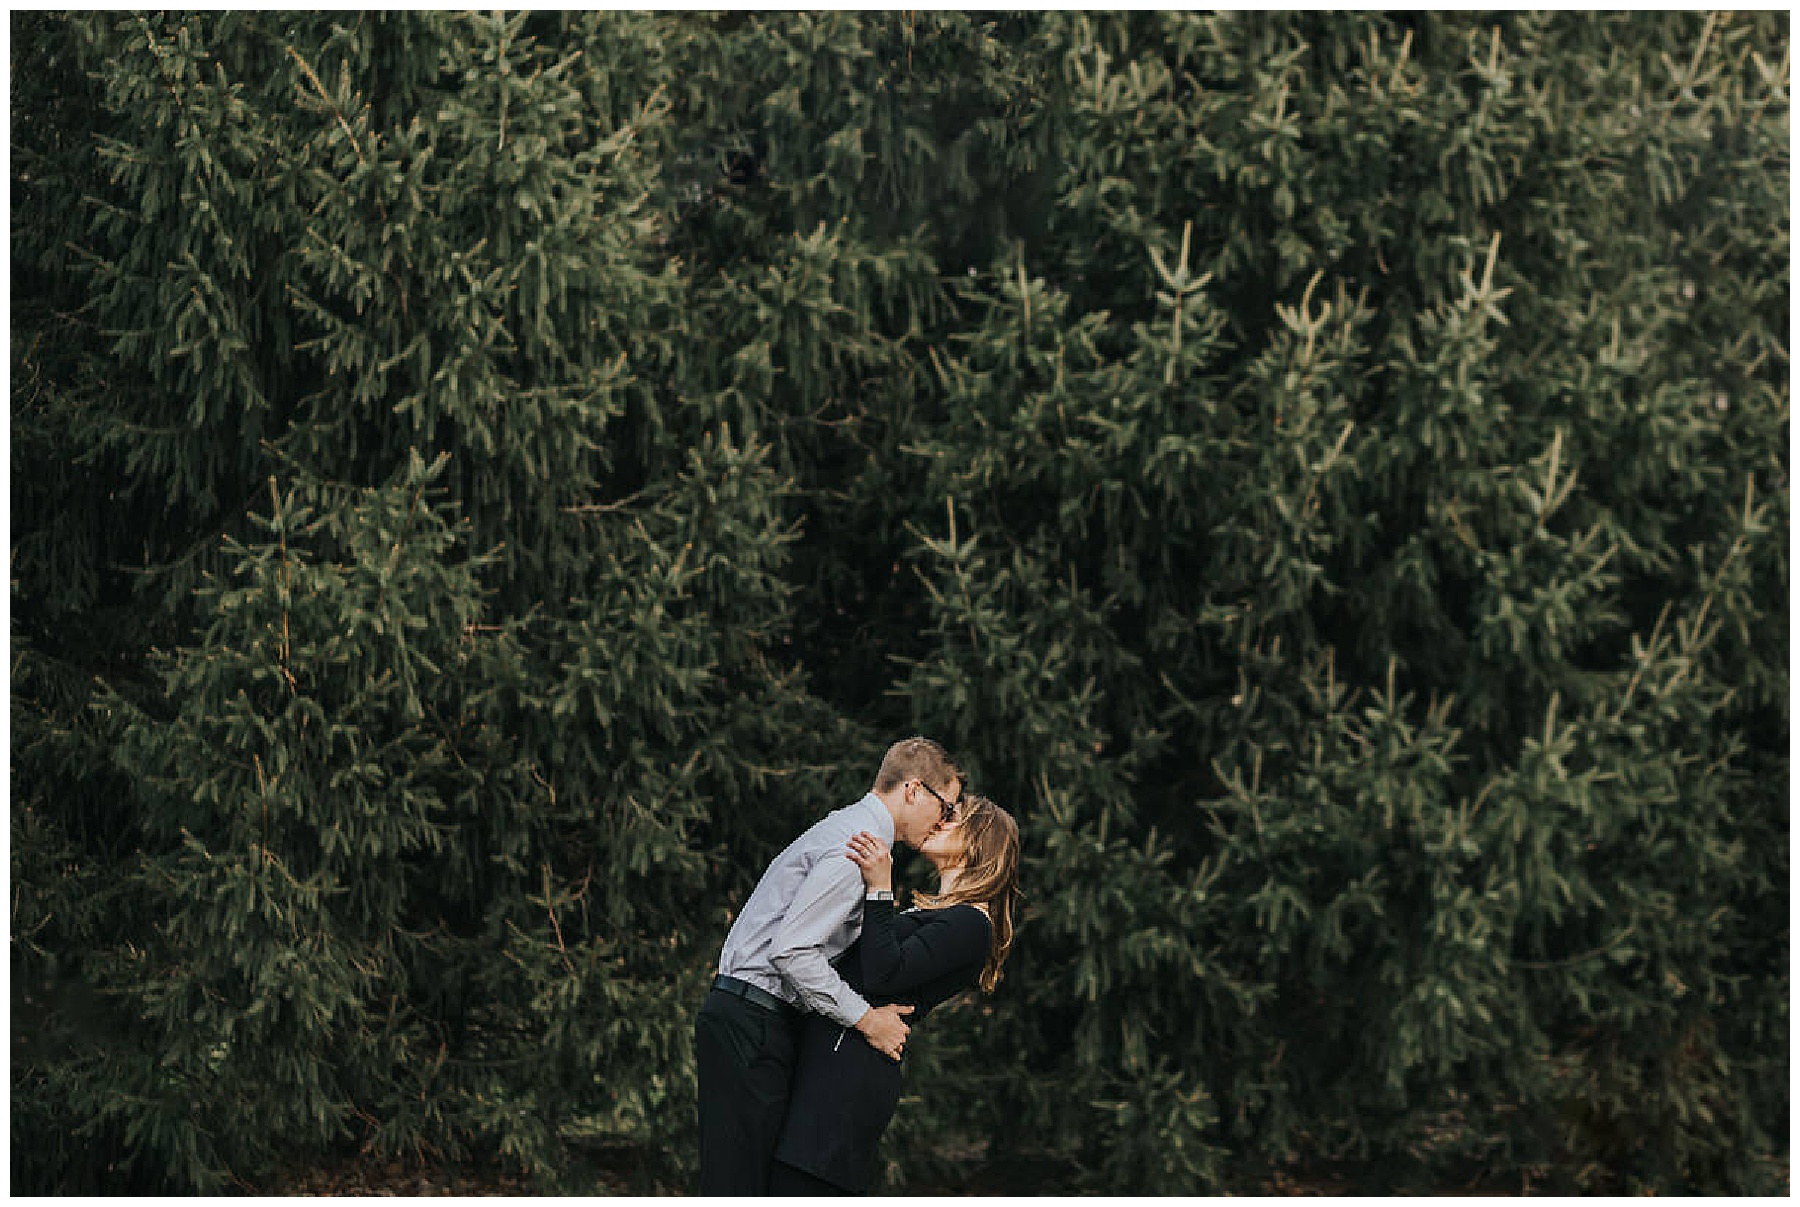 Favorite Wedding & Engagement Images from 2018